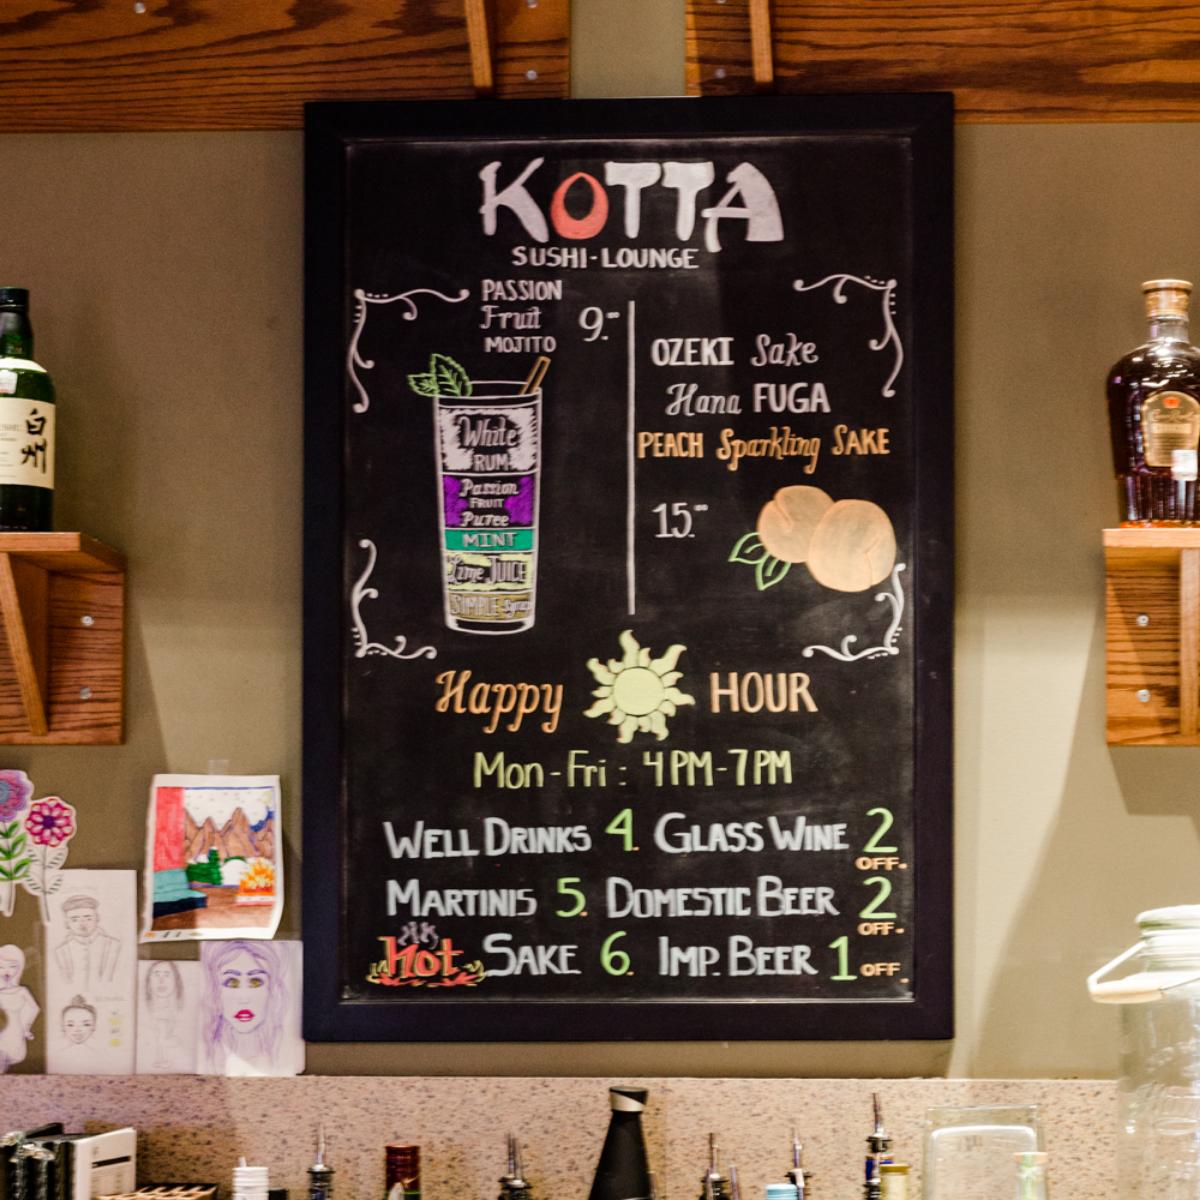 Come join us for our unique drinks. #kotta #kottasushi #sushi #frisco #friscofoodies #friscoeats #friscotexas #texaseats